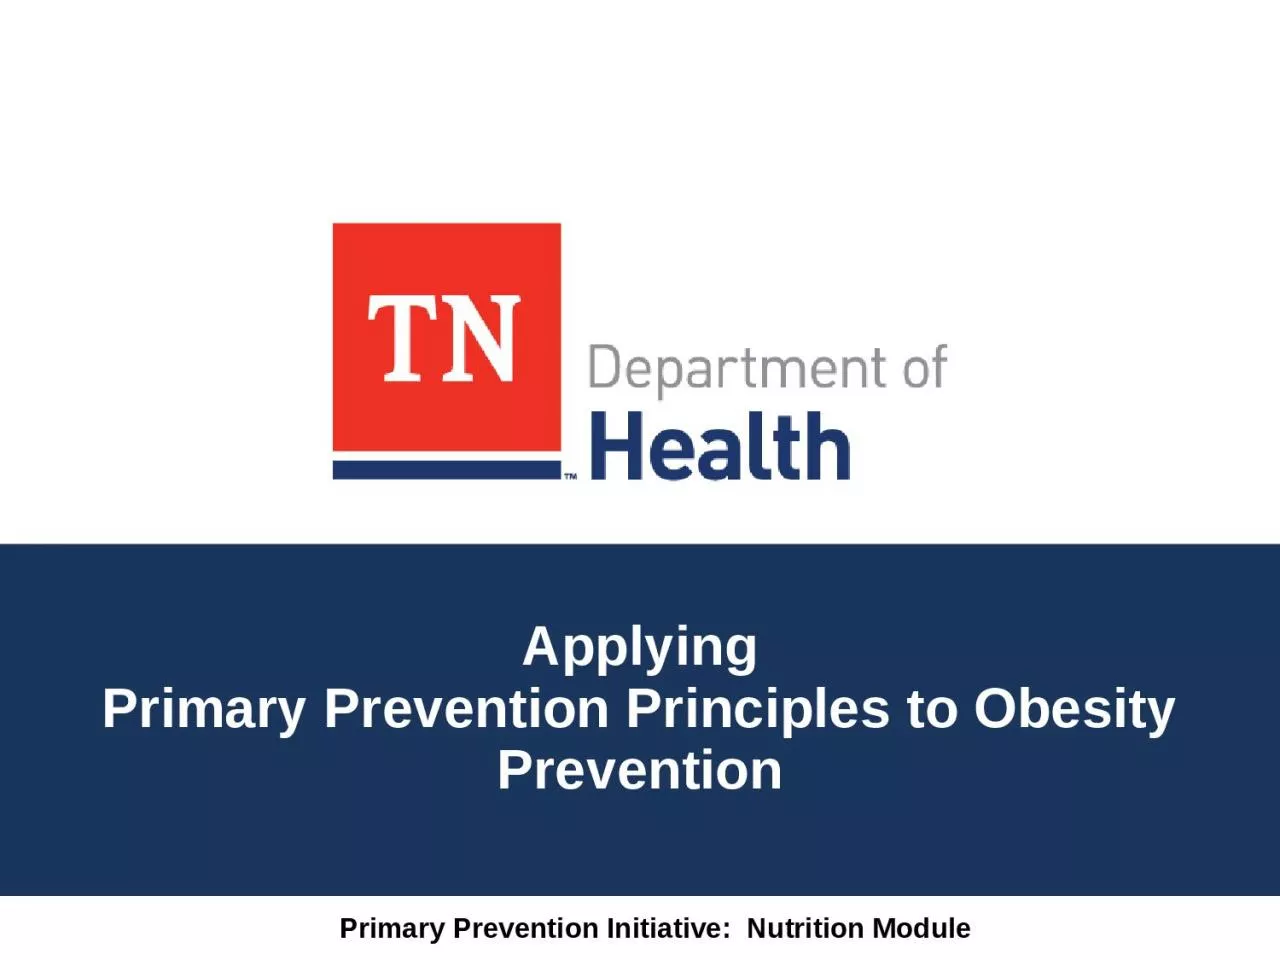 Applying Primary Prevention Principles to Obesity Prevention